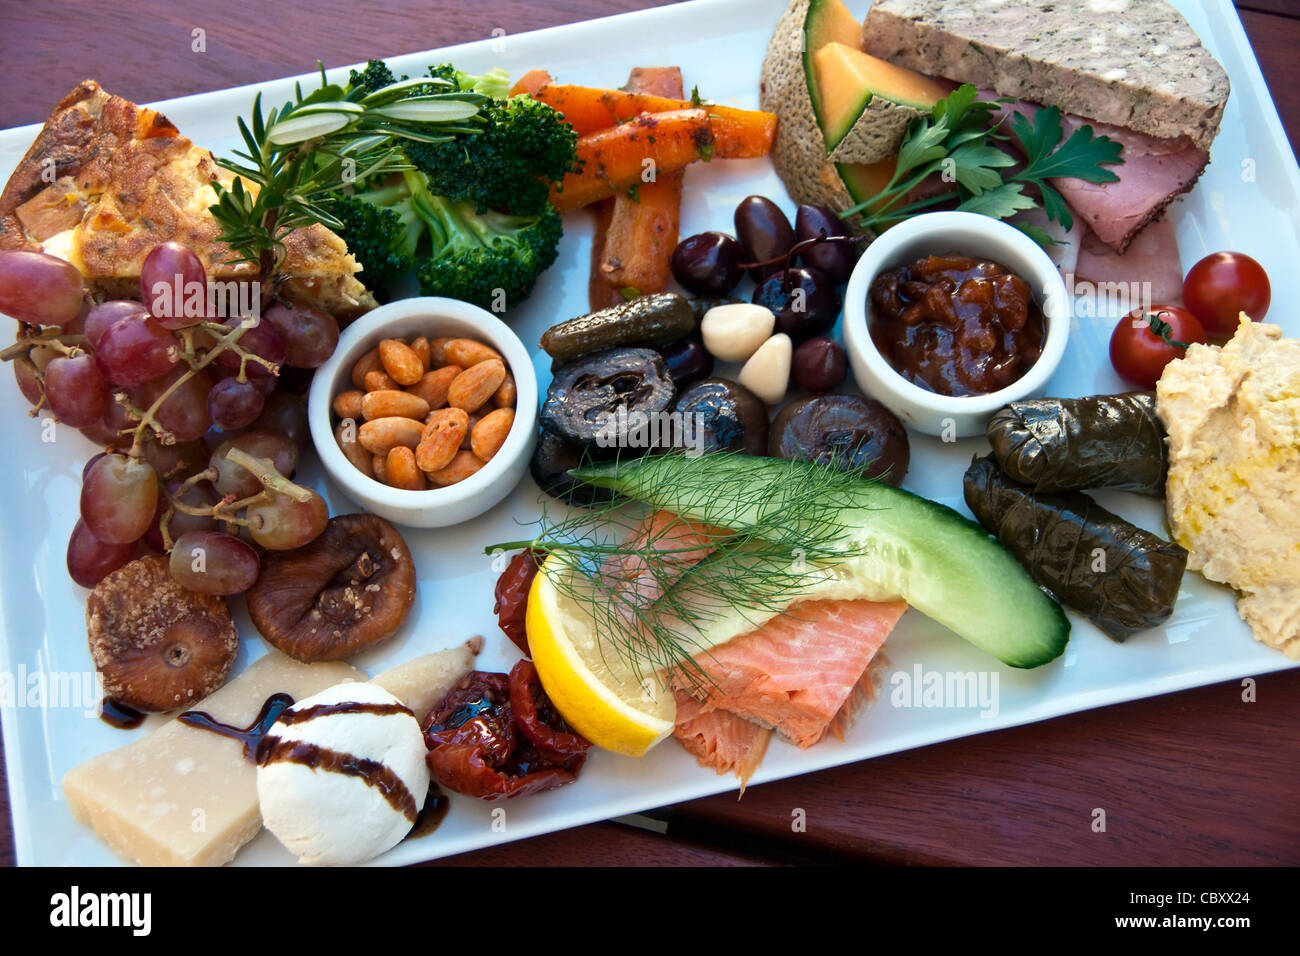 Gourmet lunch platter at Gibbston Valley Cheesery (and winery) near Queenstown, New Zealand. Stock Photo